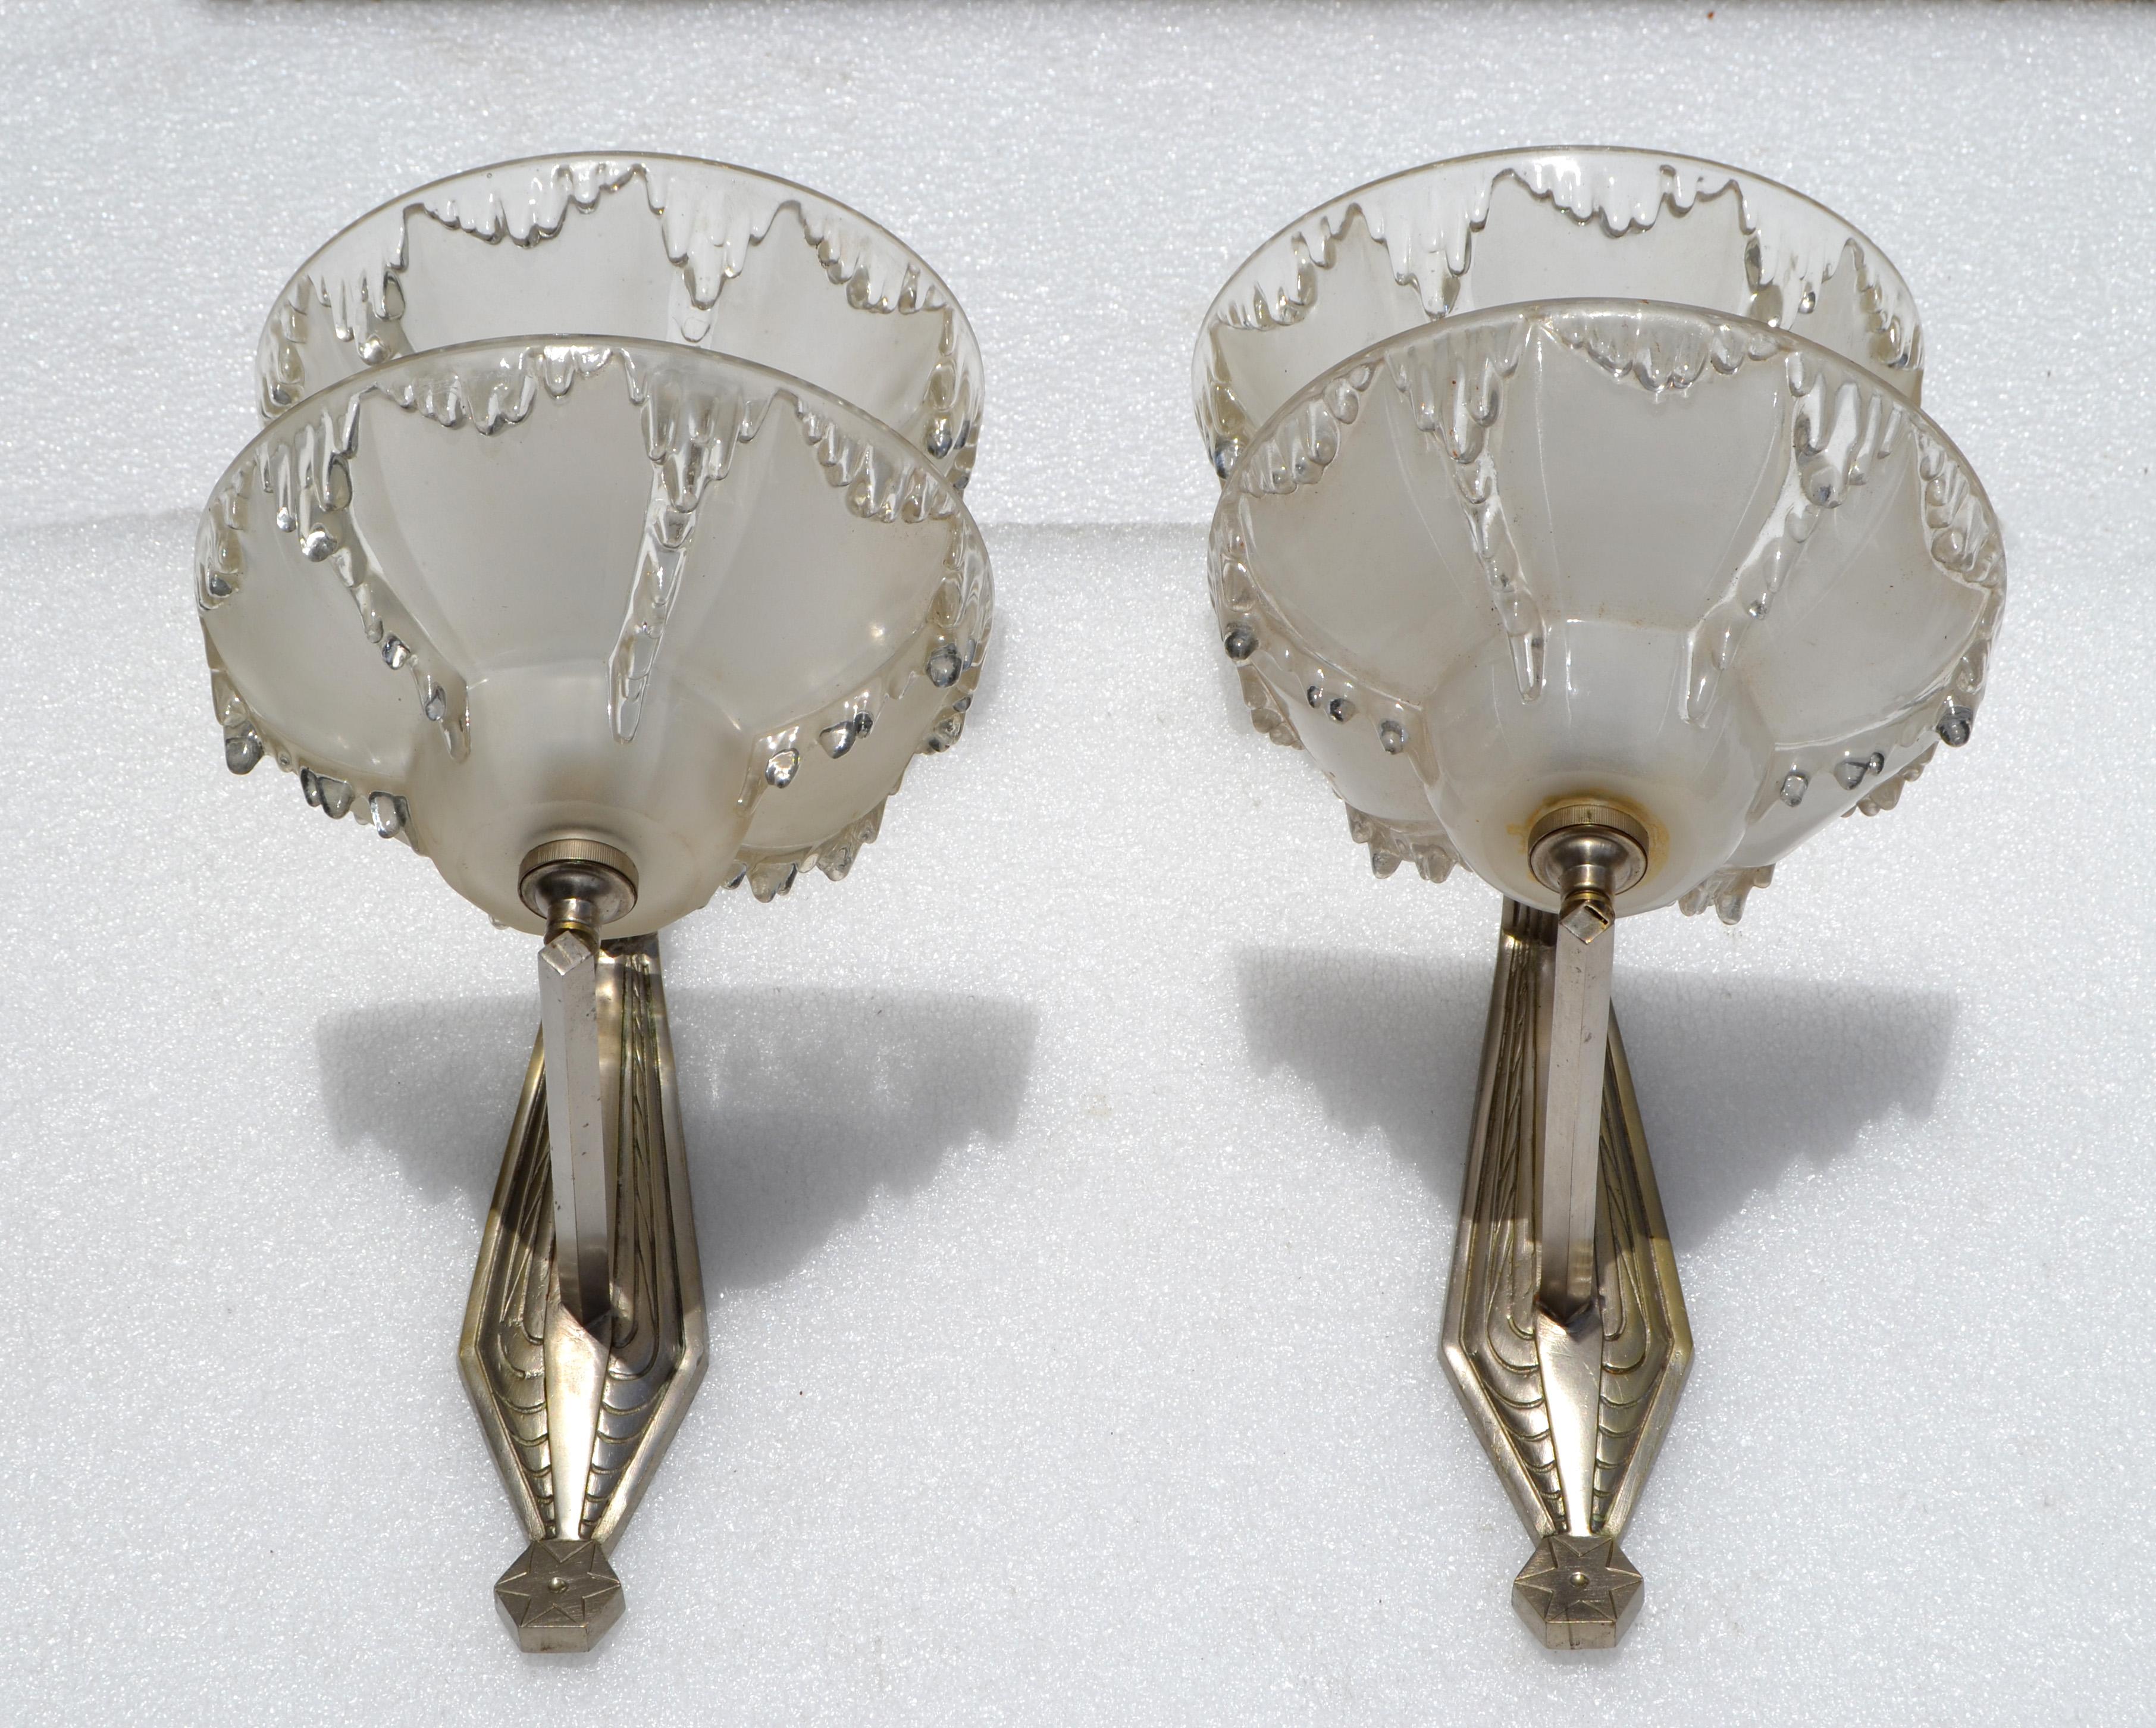 Art Deco Blown Murano Glass & Steel Wall Sconces France Mid-Century Modern, Pair For Sale 1